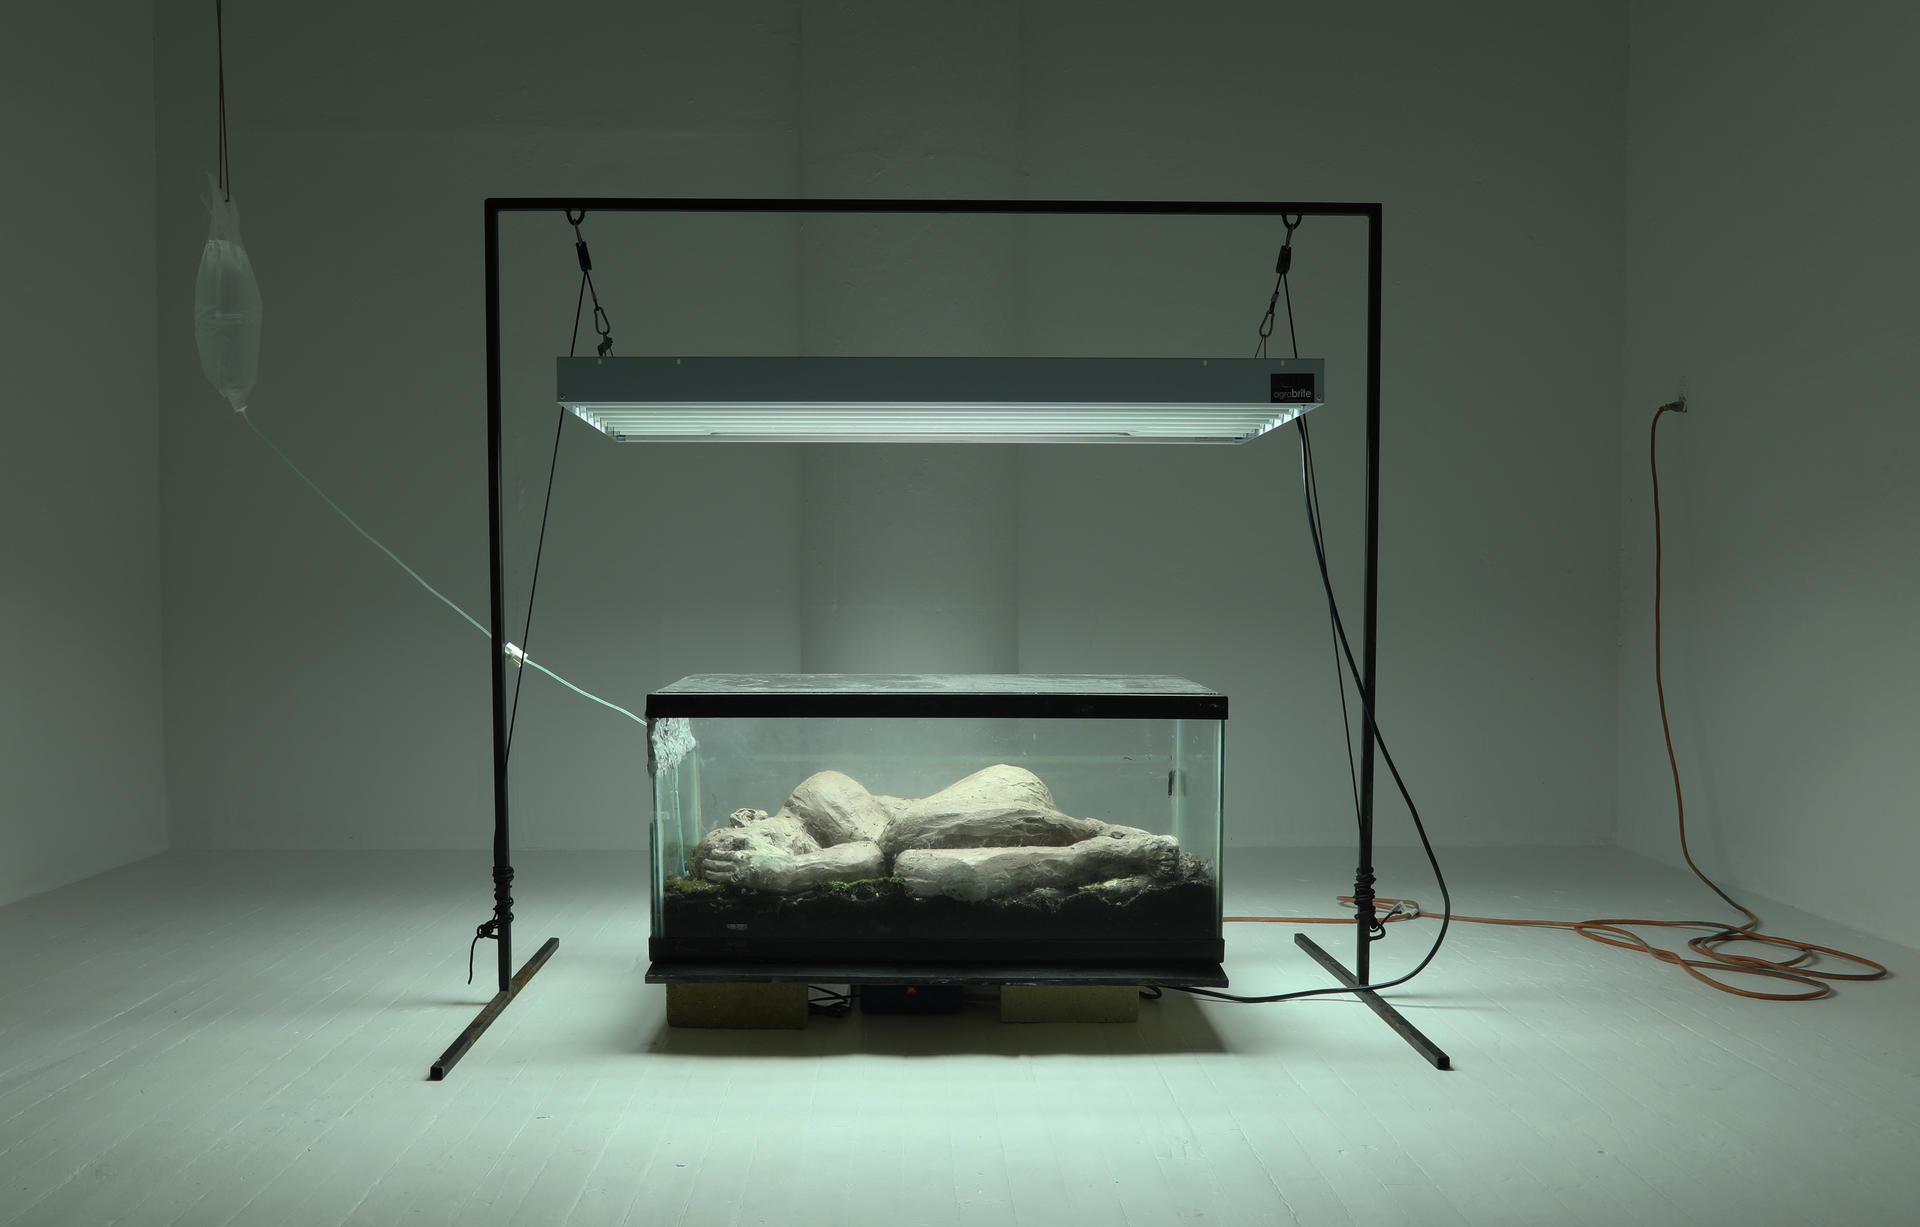 A raw clay figure lays inside a large tank filled with soil, plants and organisms while connected to an IV Bag and illuminated by a UV Light